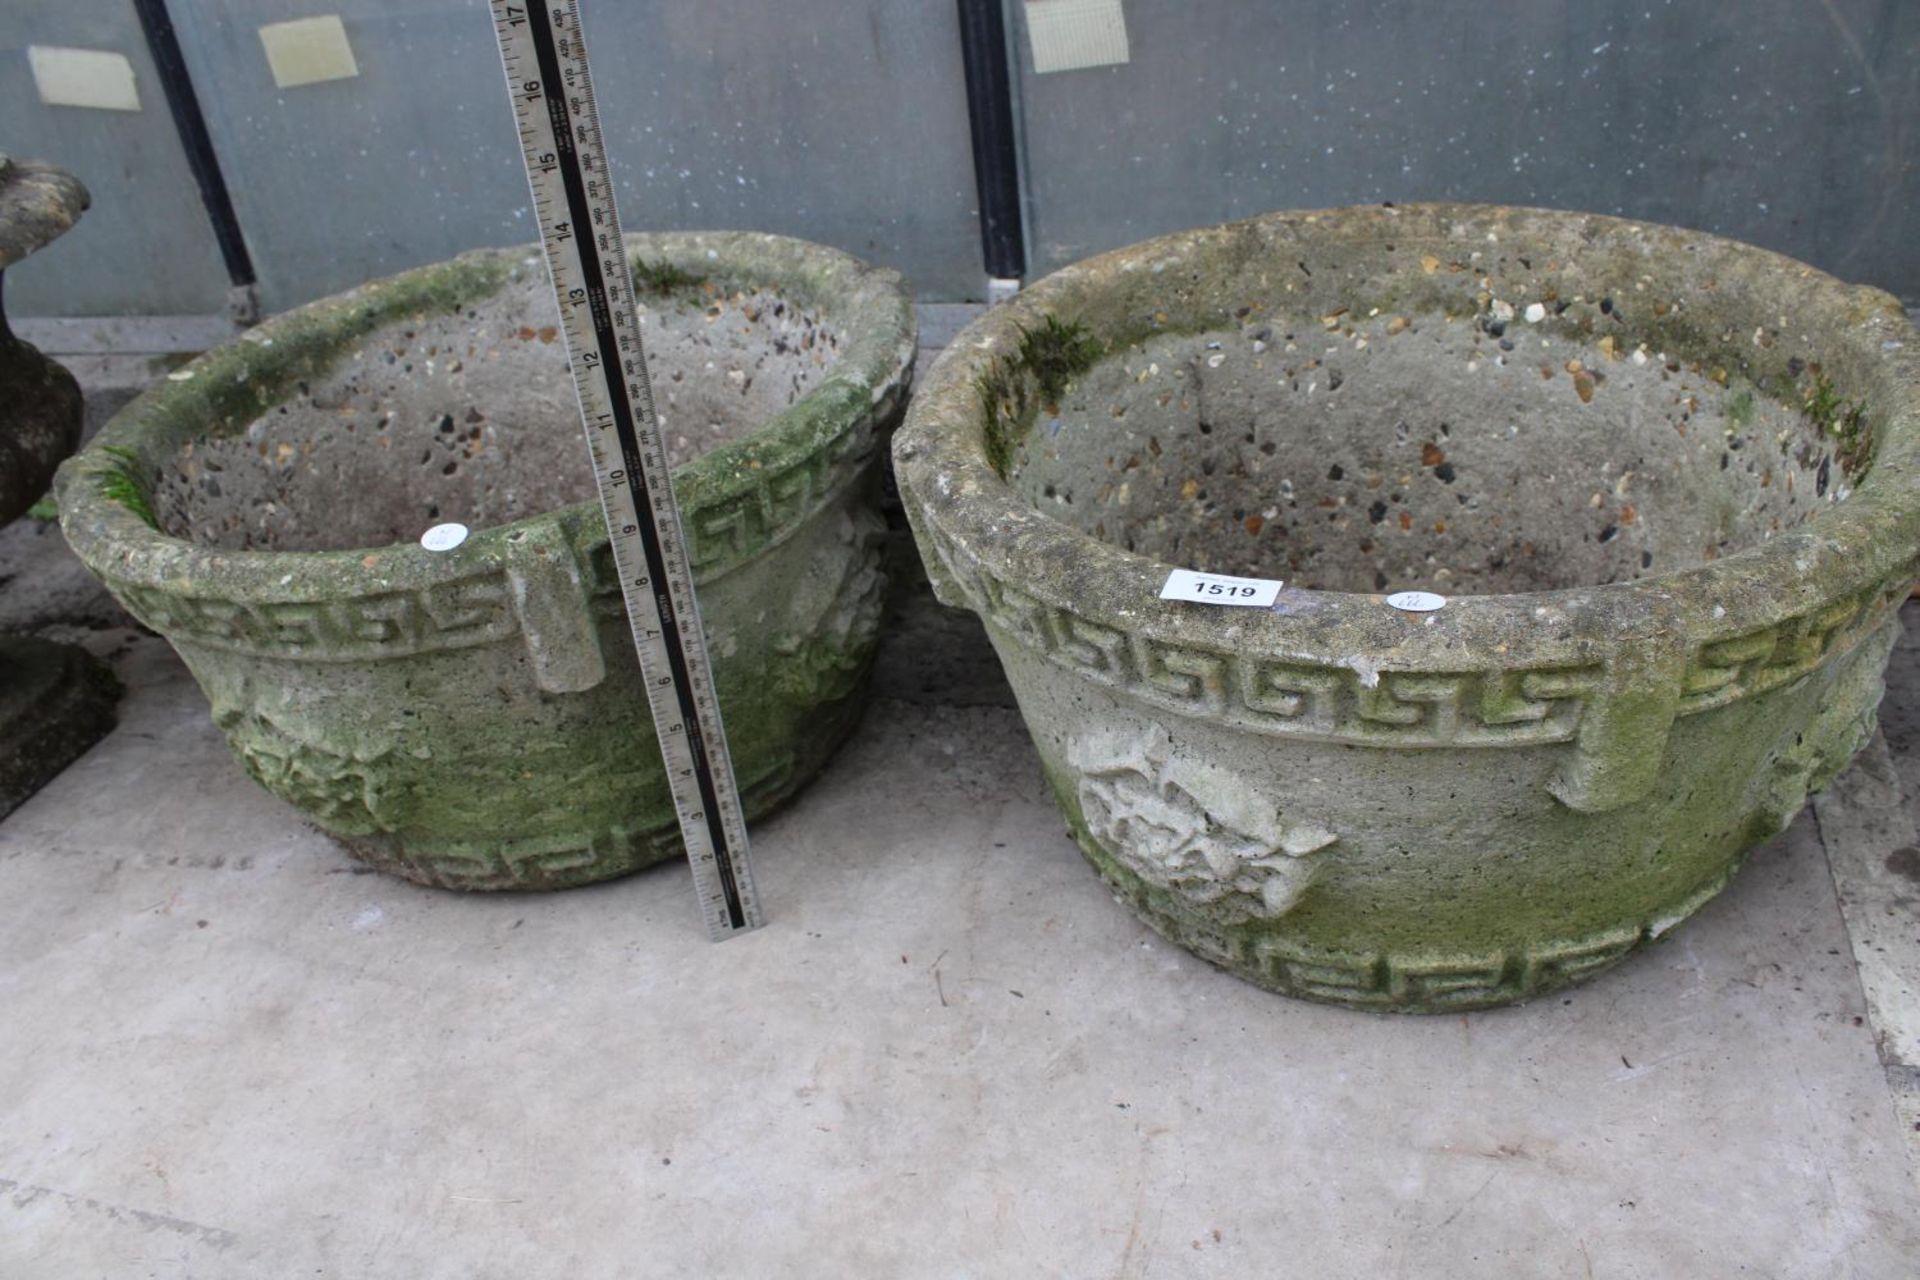 A PAIR OF CIRCULAR RECONSTITUTED STONE BOWL PLANTERS (D:44CM) - Image 3 of 3